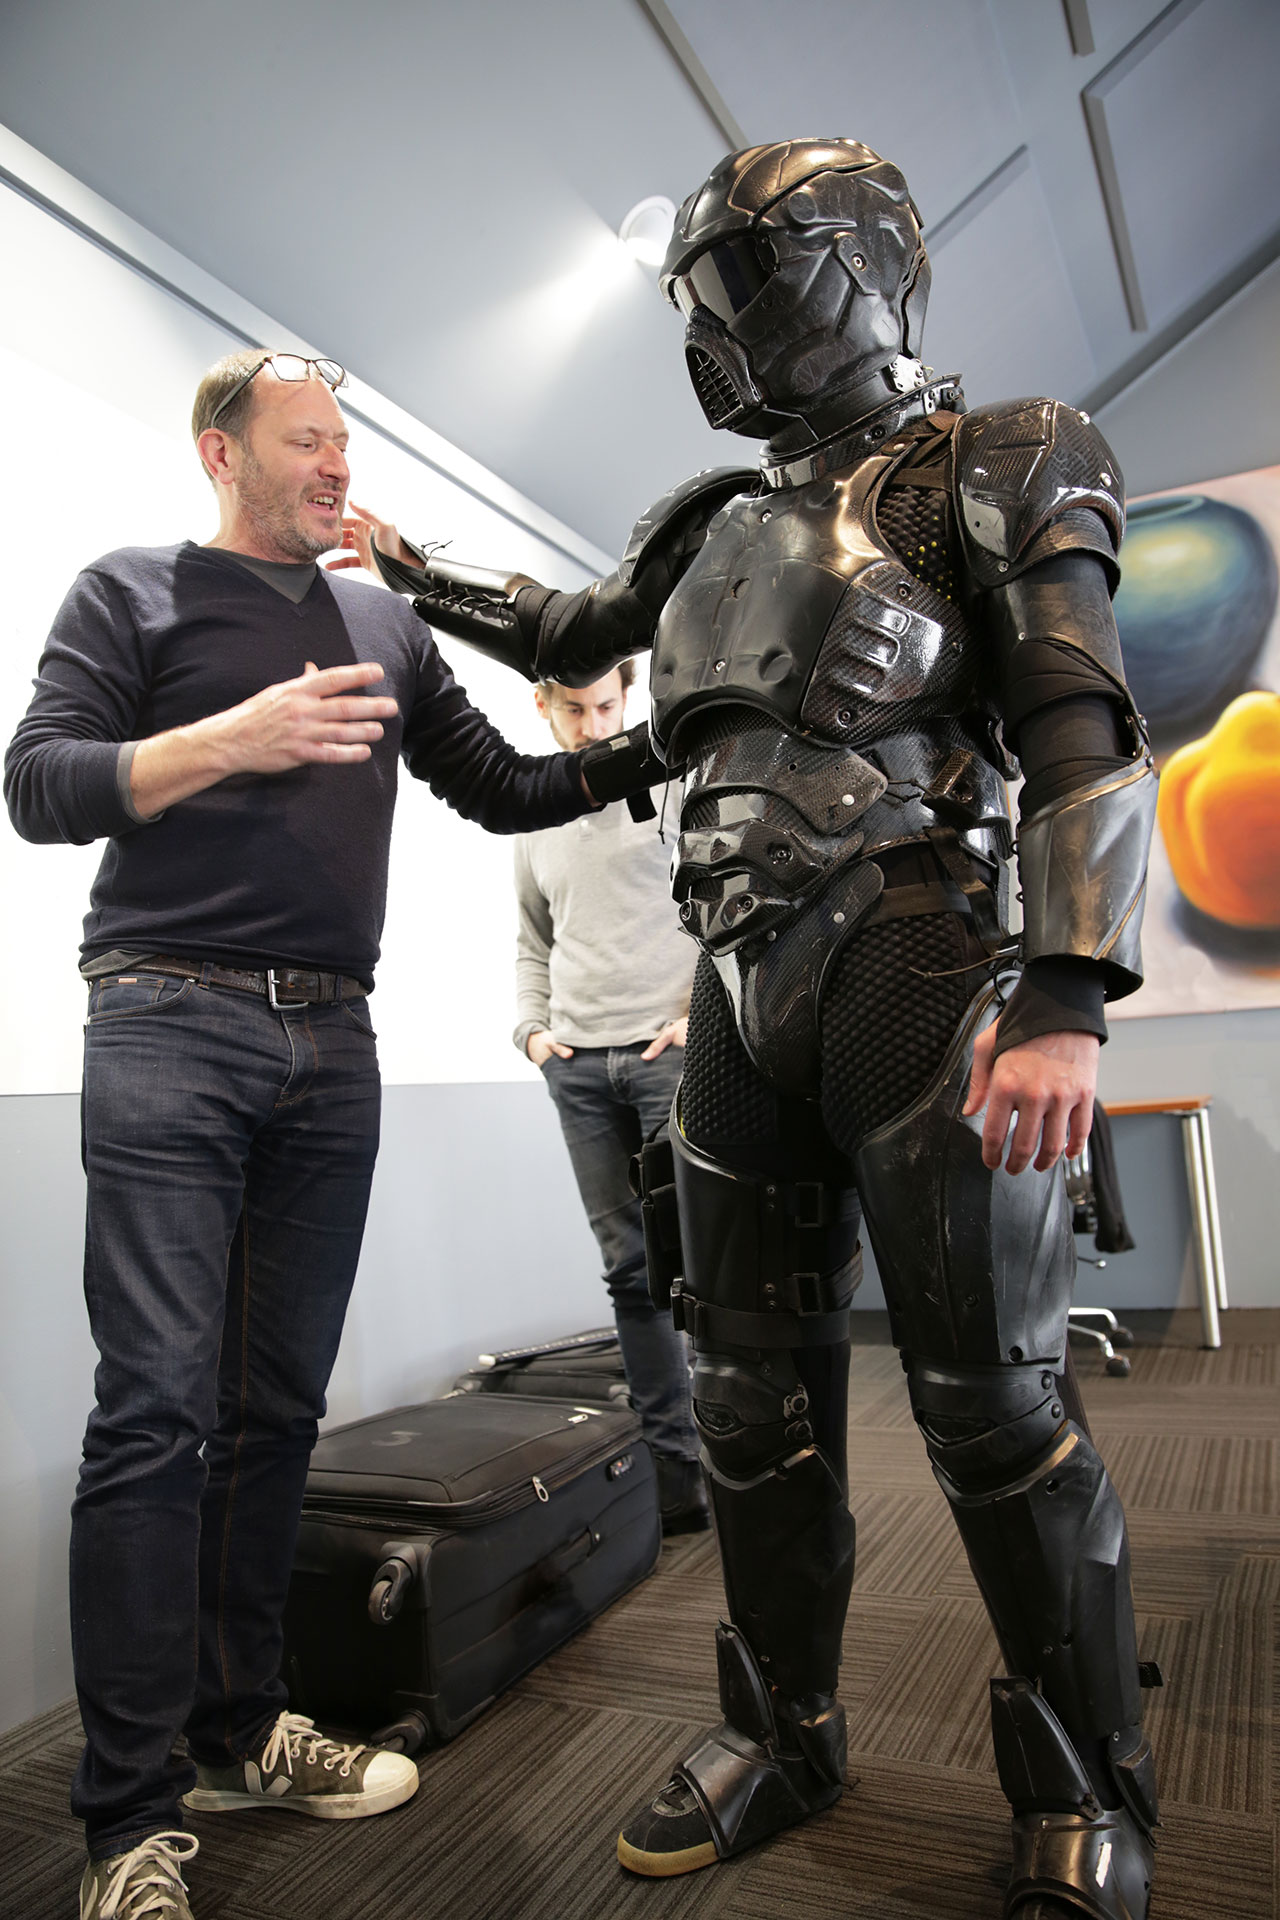 Chiron demonstrate high-tech body armour